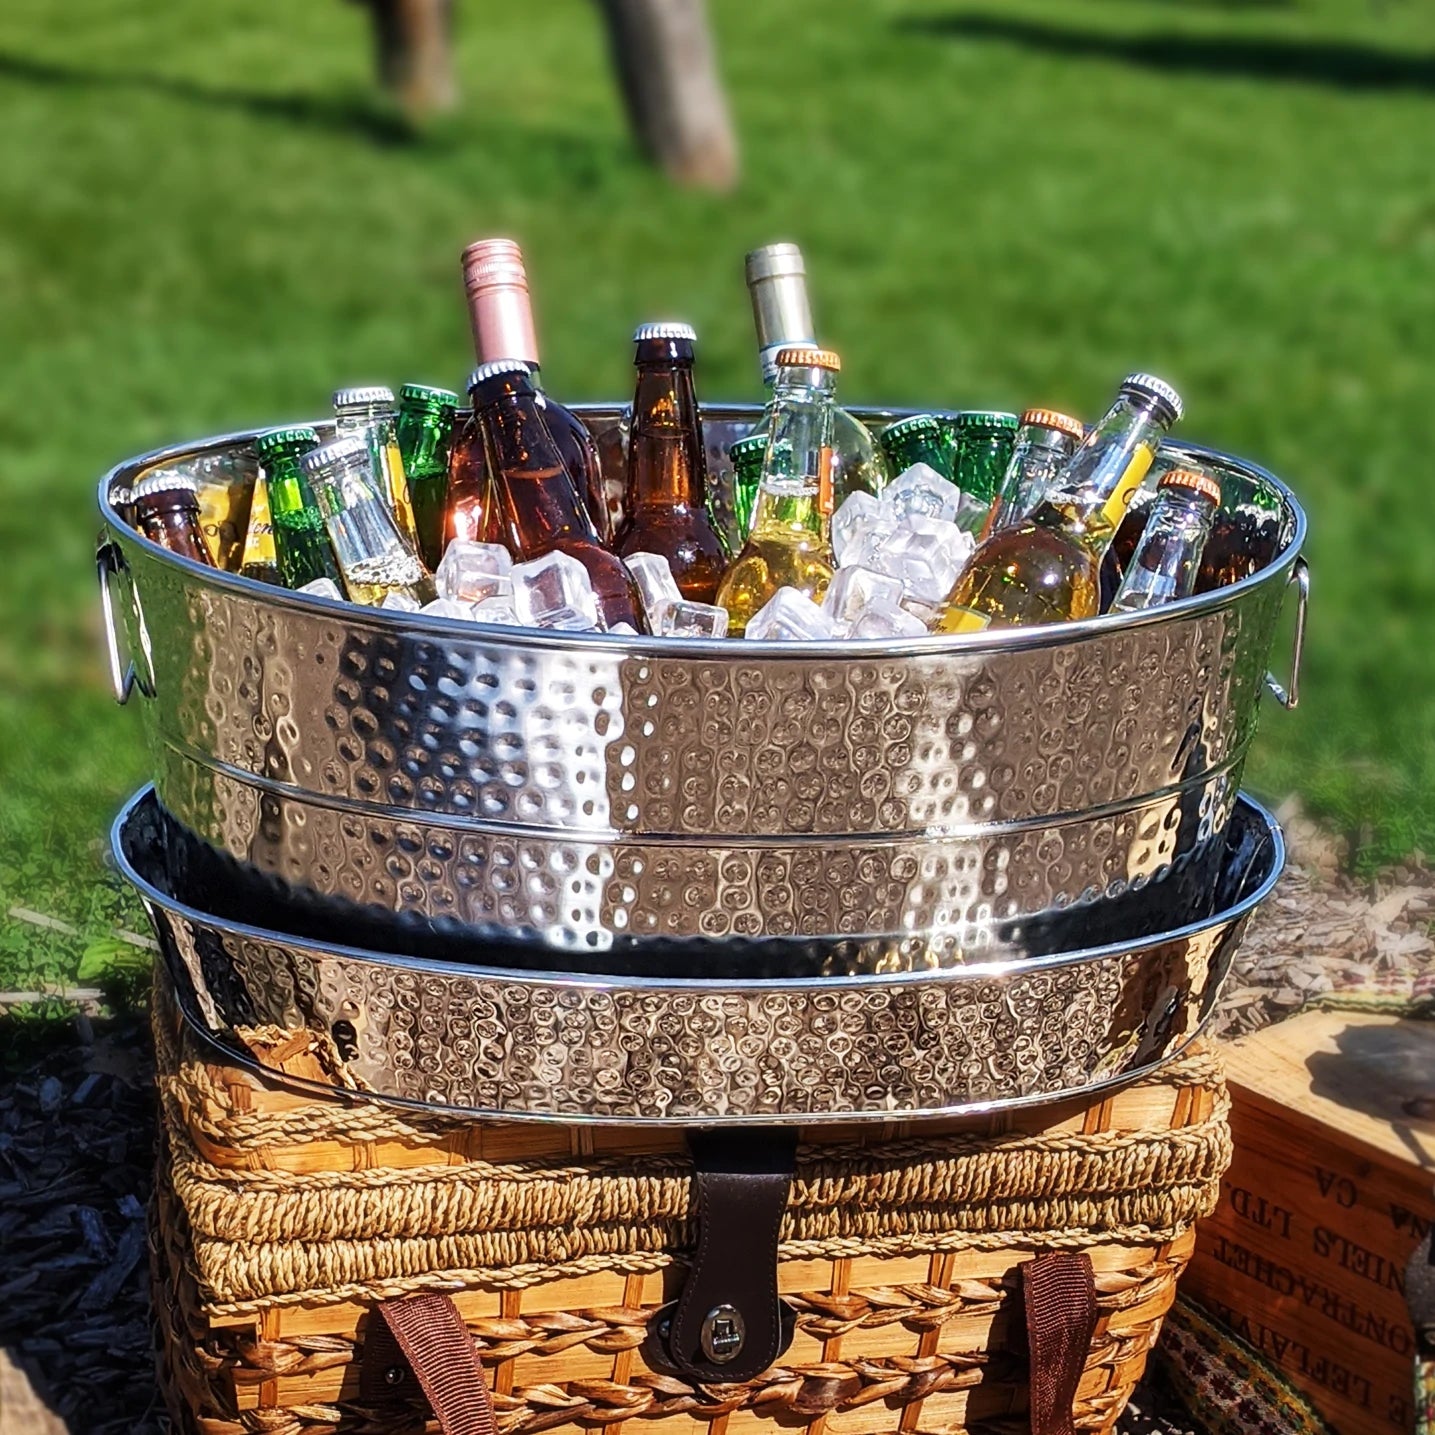 Serving tray with hammering on the sides, stainless steel, paired with our stainless steel Aspen bucket with hammering on the sides. Use for parties, weddings, bbqs, or just to keep your drinks cold without having to worry about rings or drips on your table.